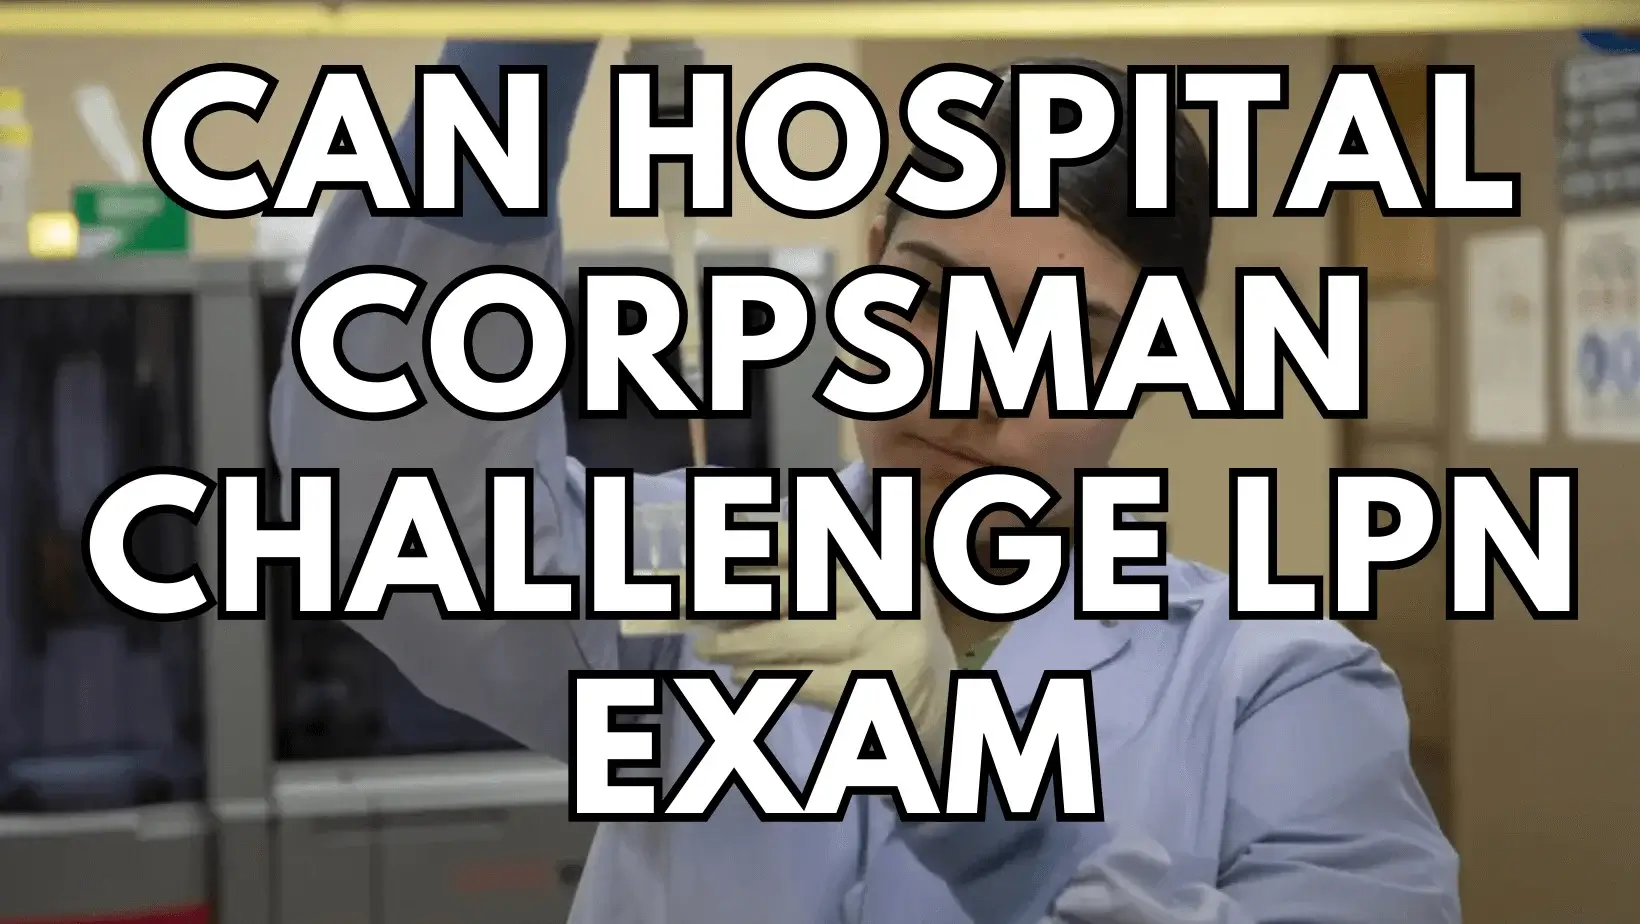 Can Hospital Corpsman Challenge LPN Exam featured image